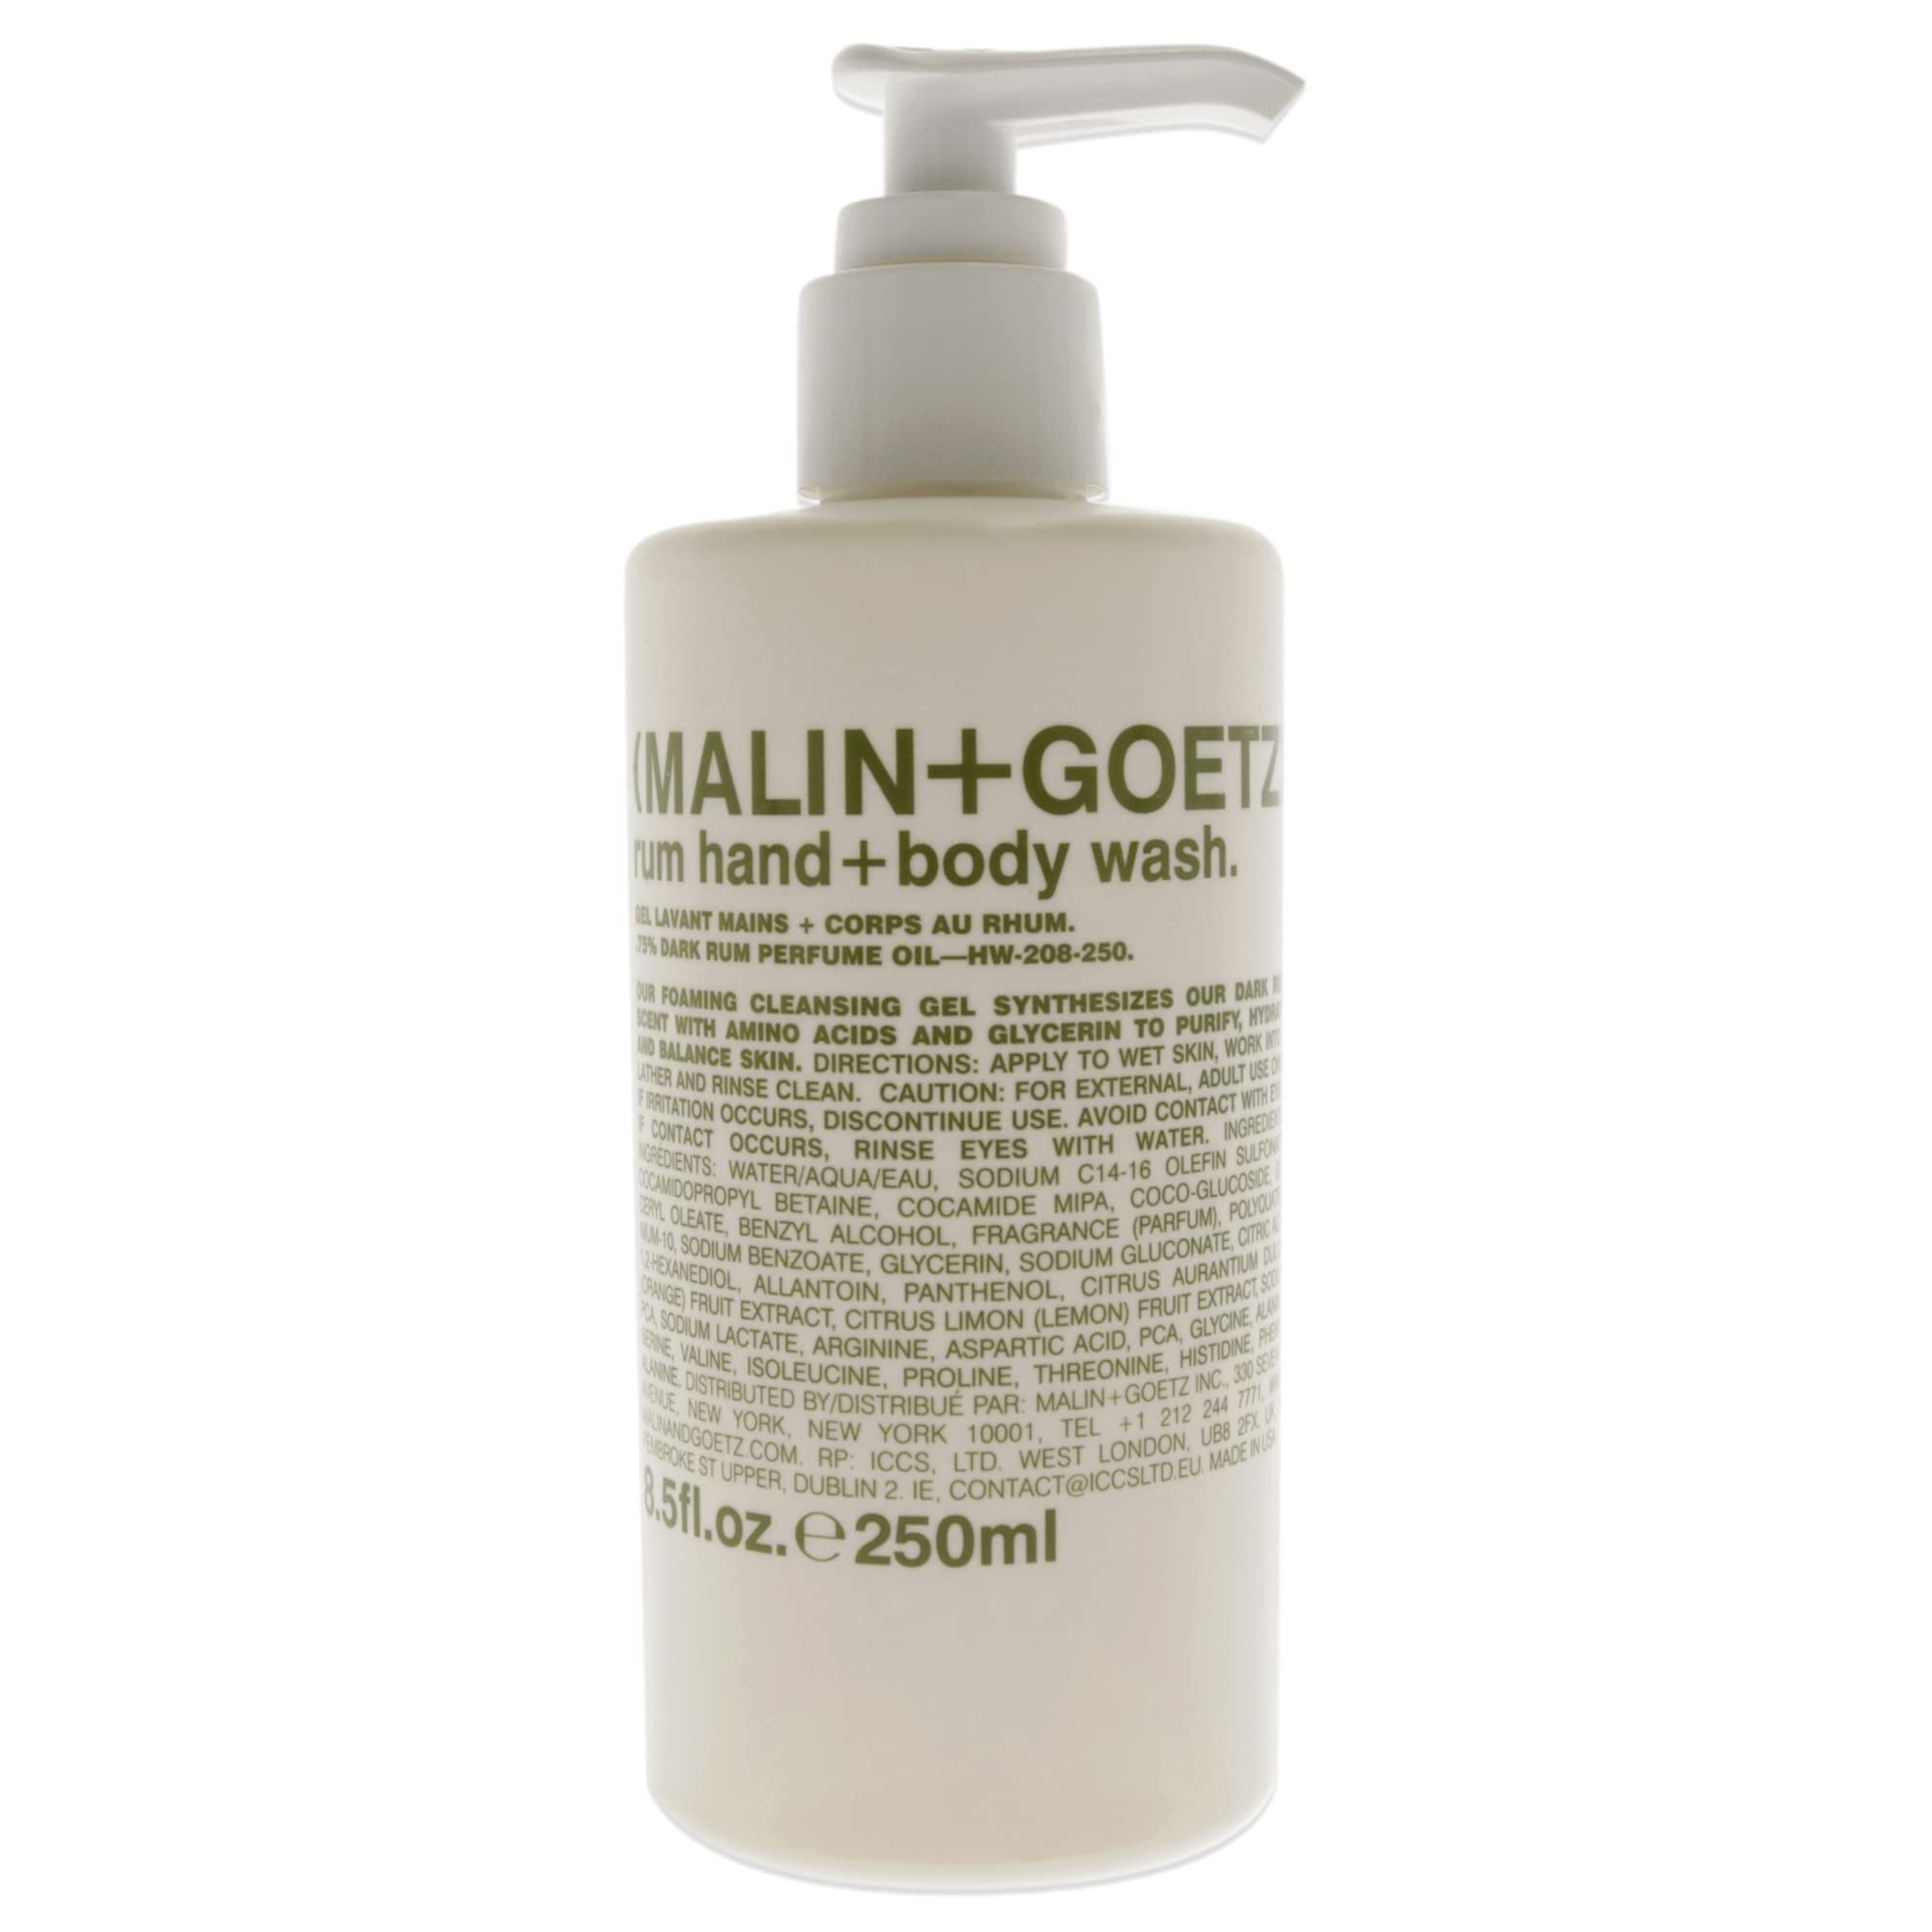 Malin + Goetz Rum Hand + Body Wash, soothing hydrating body soap for men and women, prevents dry skin, no stripping or irritation. Natural ingredients, cruelty-free, vegan